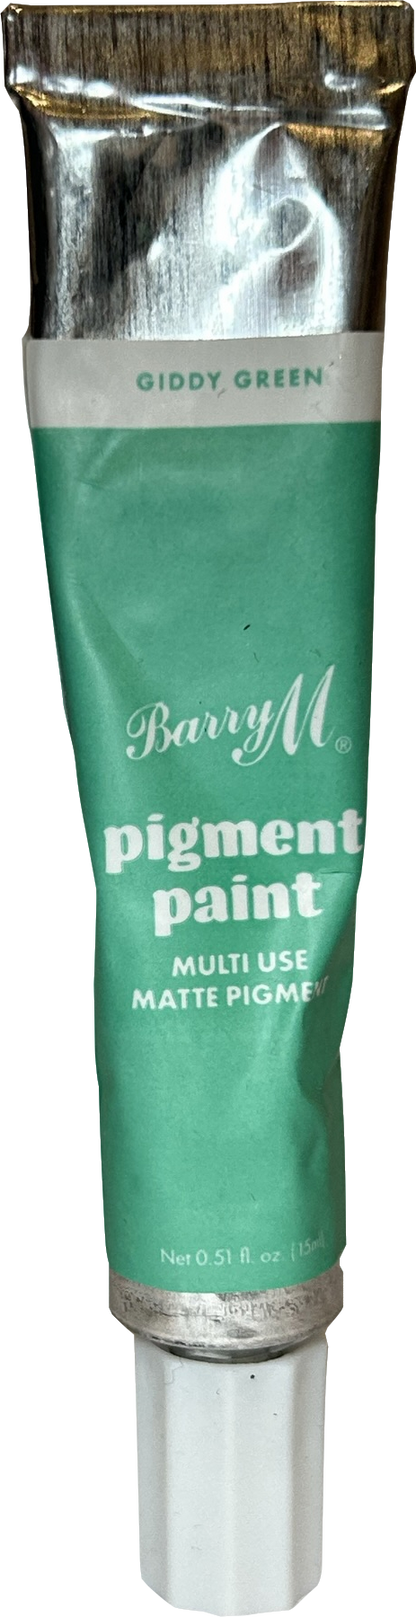 Barry M Face & Body Pigment Paint Giddy Green 15ml